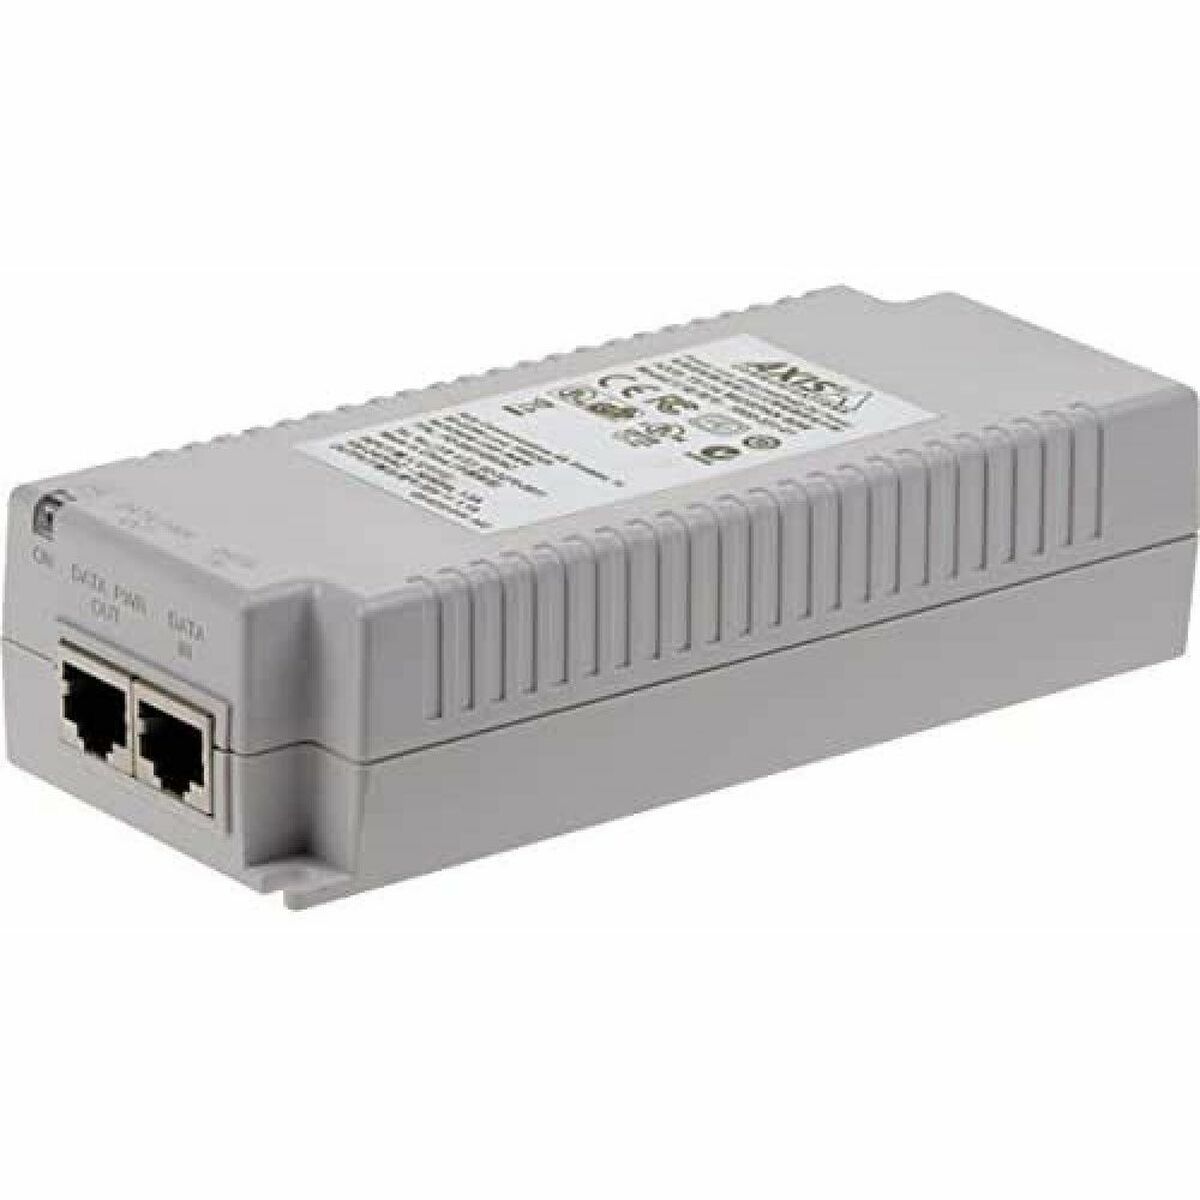 PoE Injector Axis 5900-332 60 W White, Axis, Computing, Components, poe-injector-axis-5900-332-60-w-white, Brand_Axis, category-reference-2609, category-reference-2803, category-reference-2811, category-reference-t-19685, category-reference-t-19912, category-reference-t-21360, computers / components, Condition_NEW, Price_100 - 200, Teleworking, RiotNook